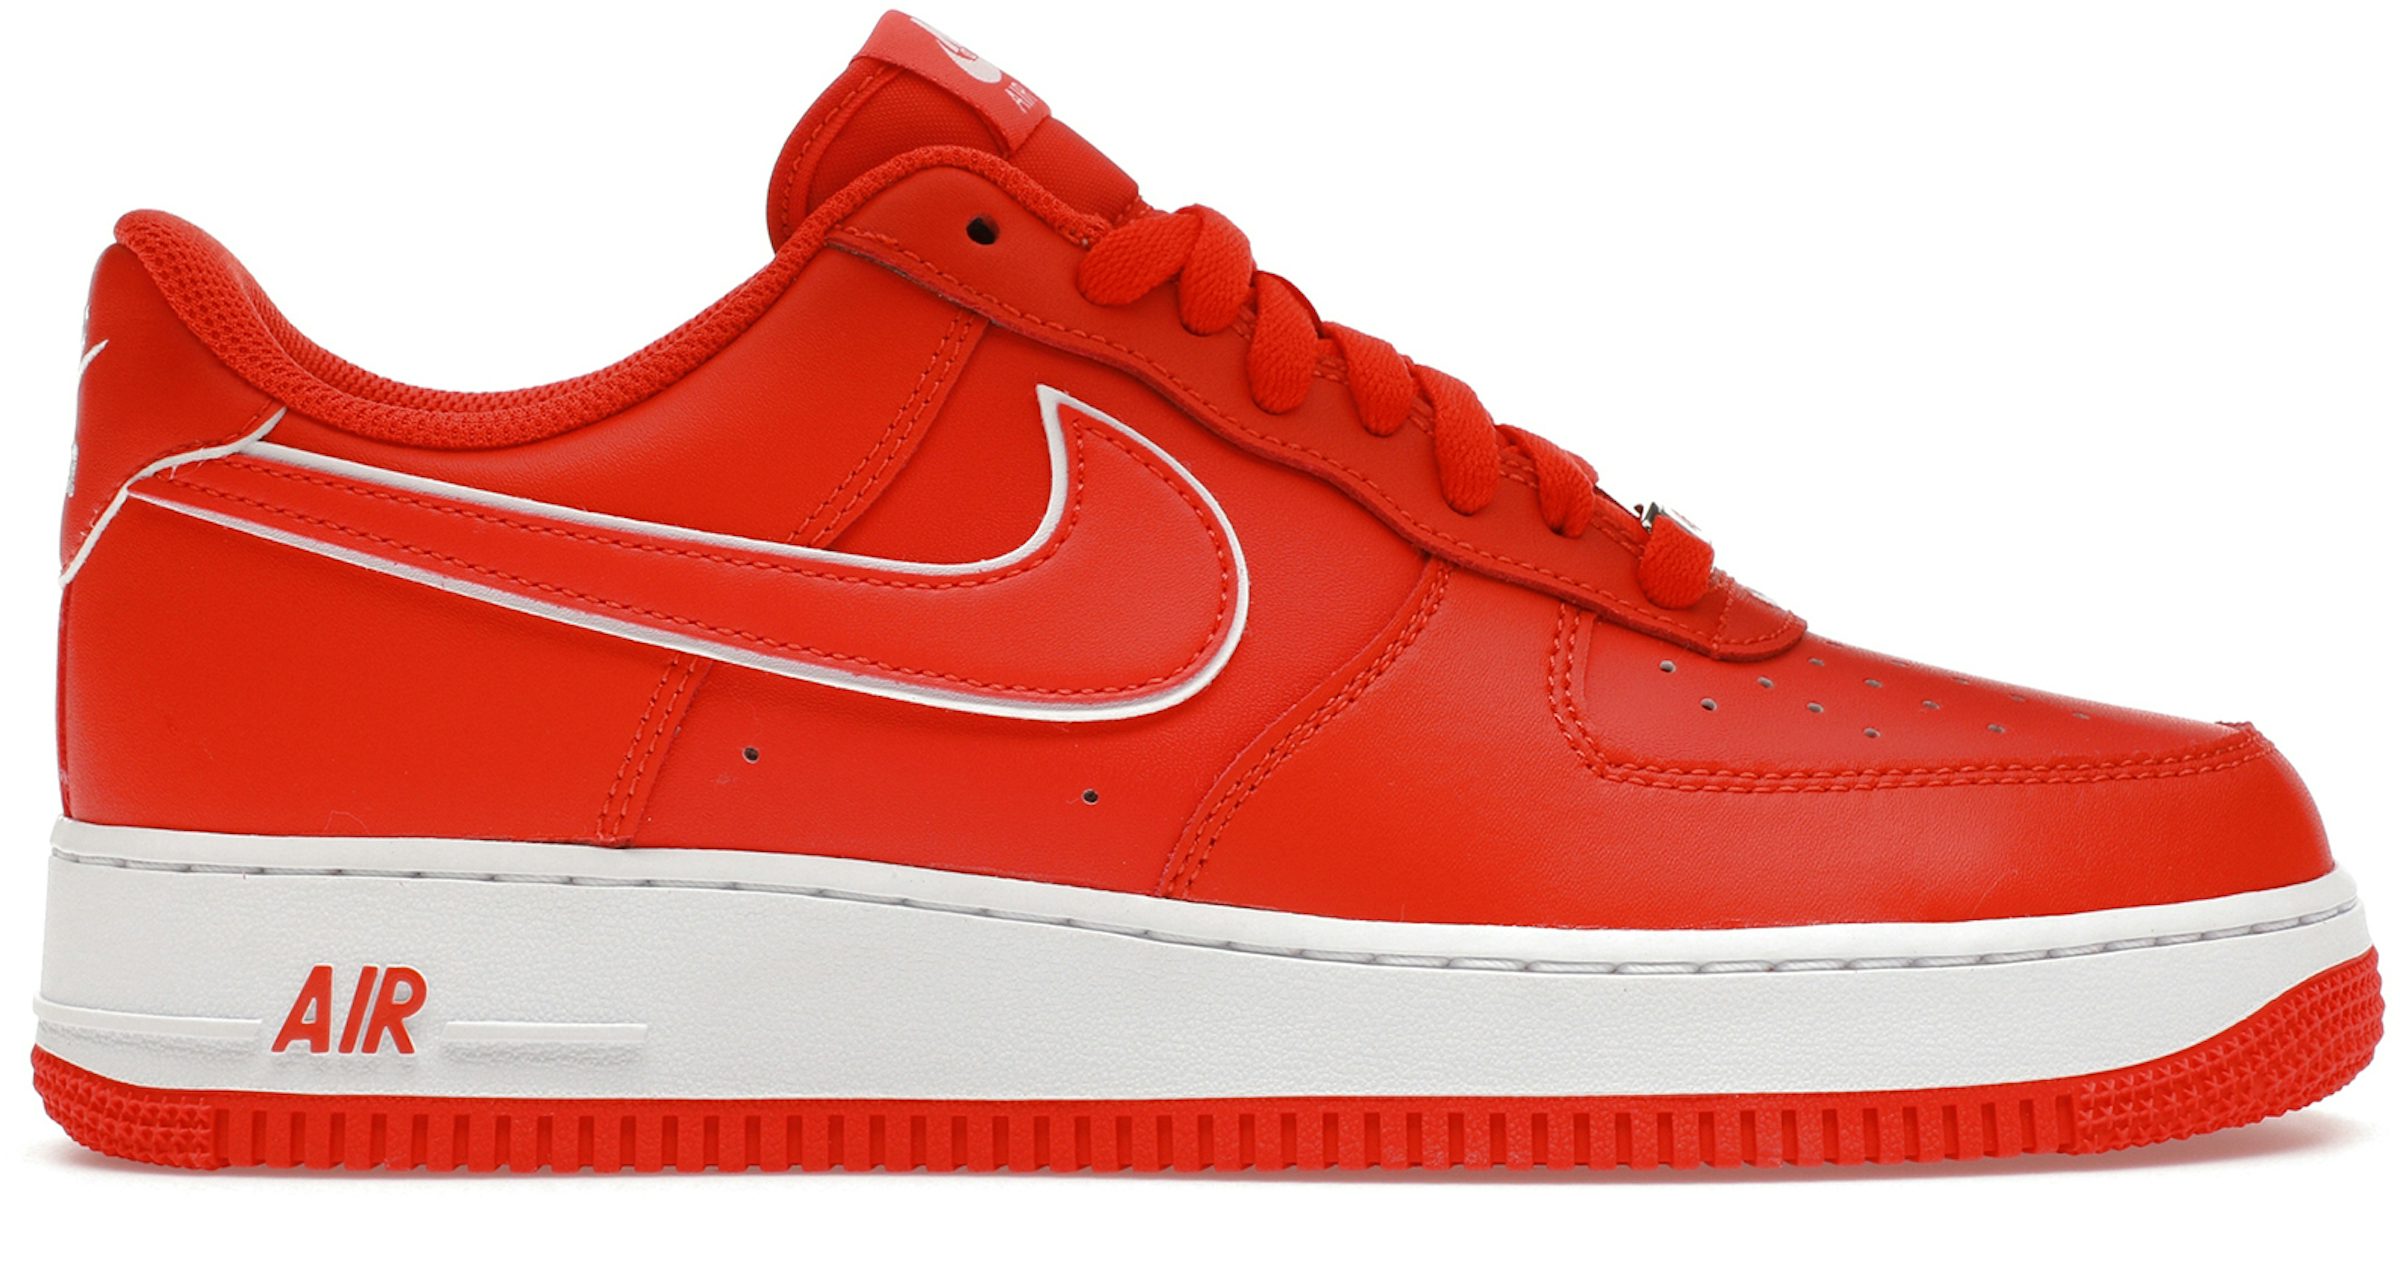 Thehypesole - NIKE AIR FORCE 1 07 LV08 “WHITE RED” Price: Bnd